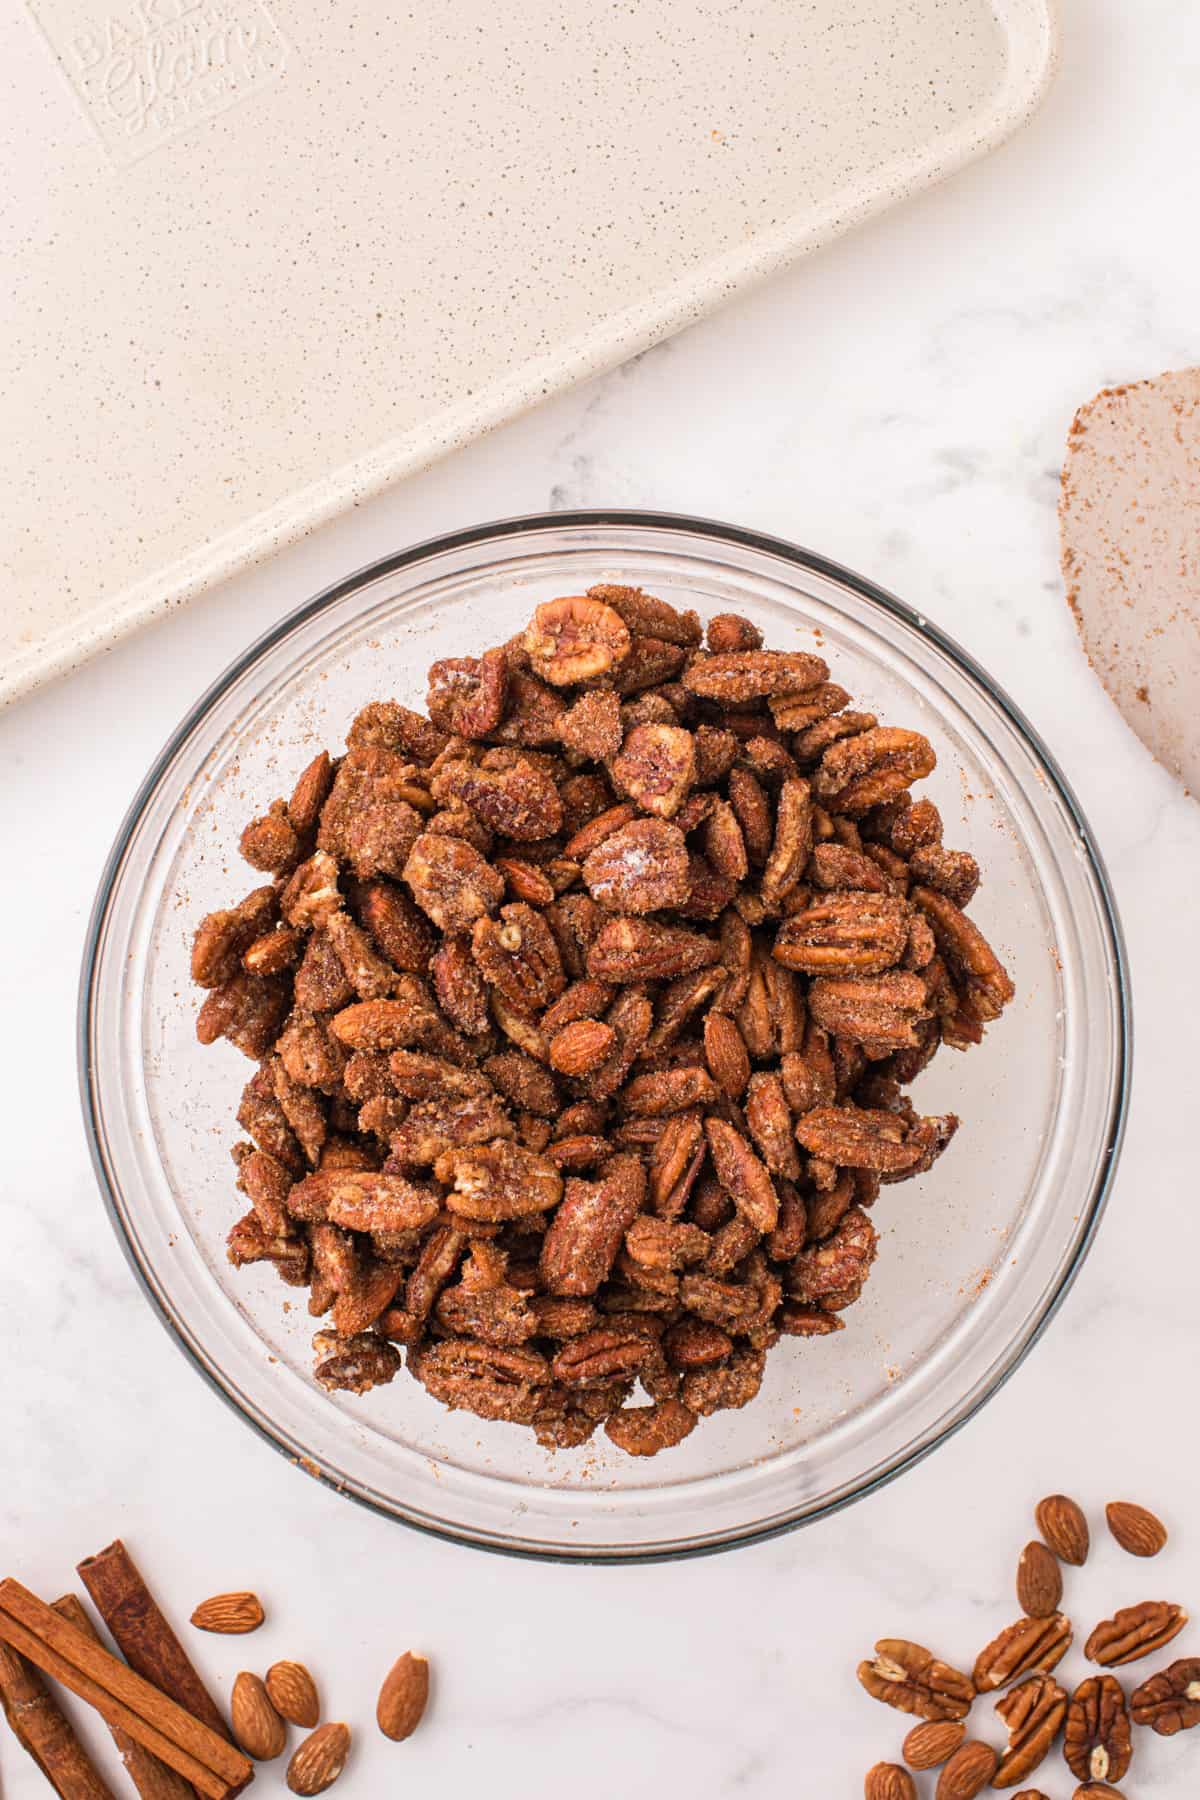 Almonds and pecan coated in sugar mixture in mixing bowl.